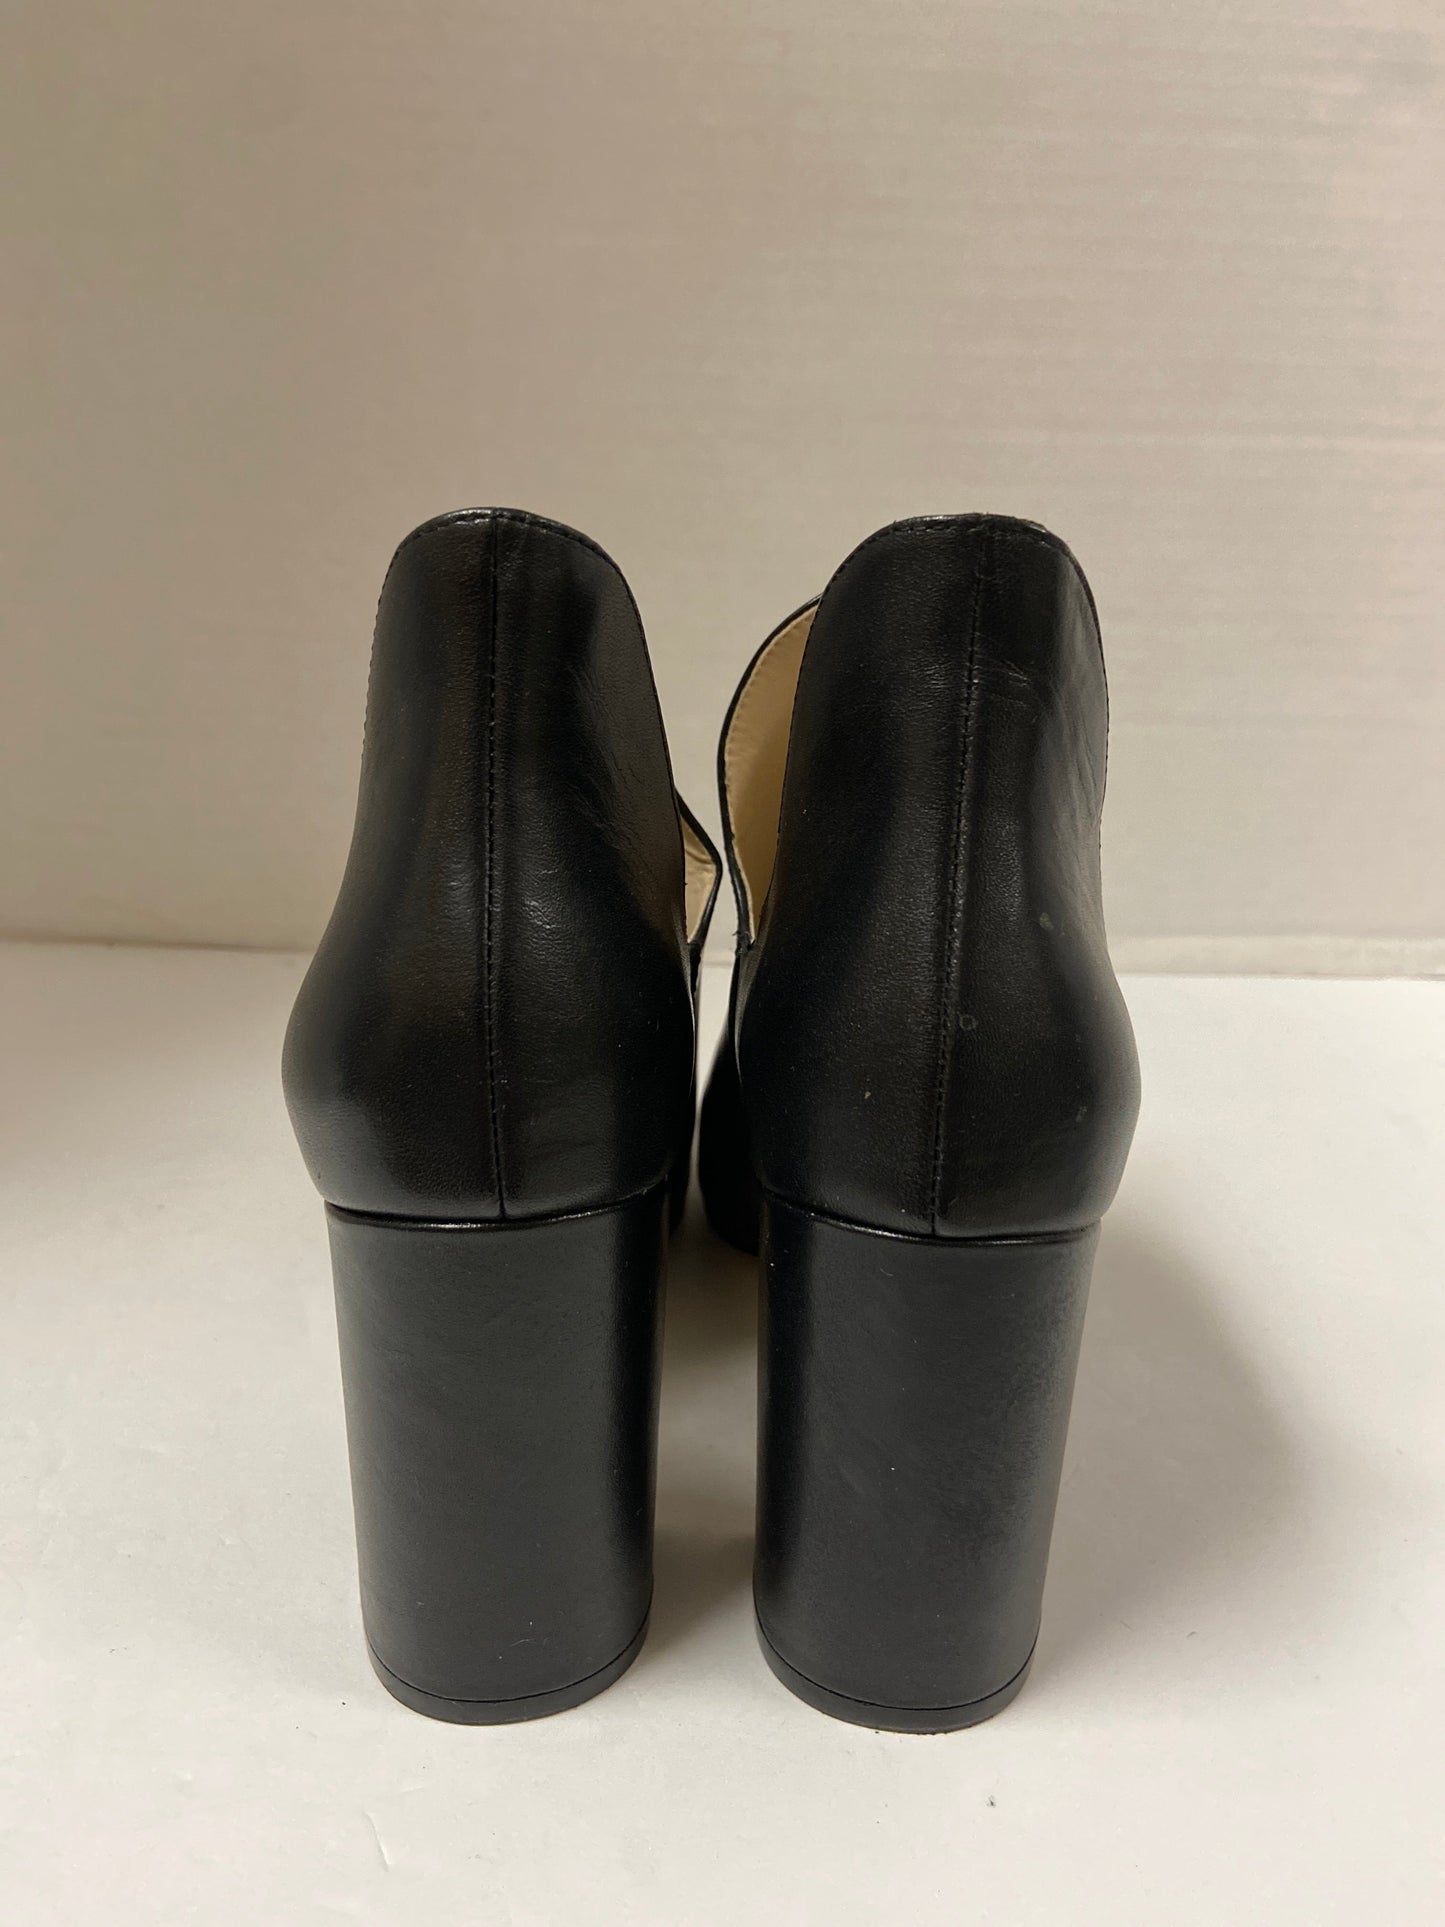 Sandals Heels Block By Cole-haan O  Size: 6.5